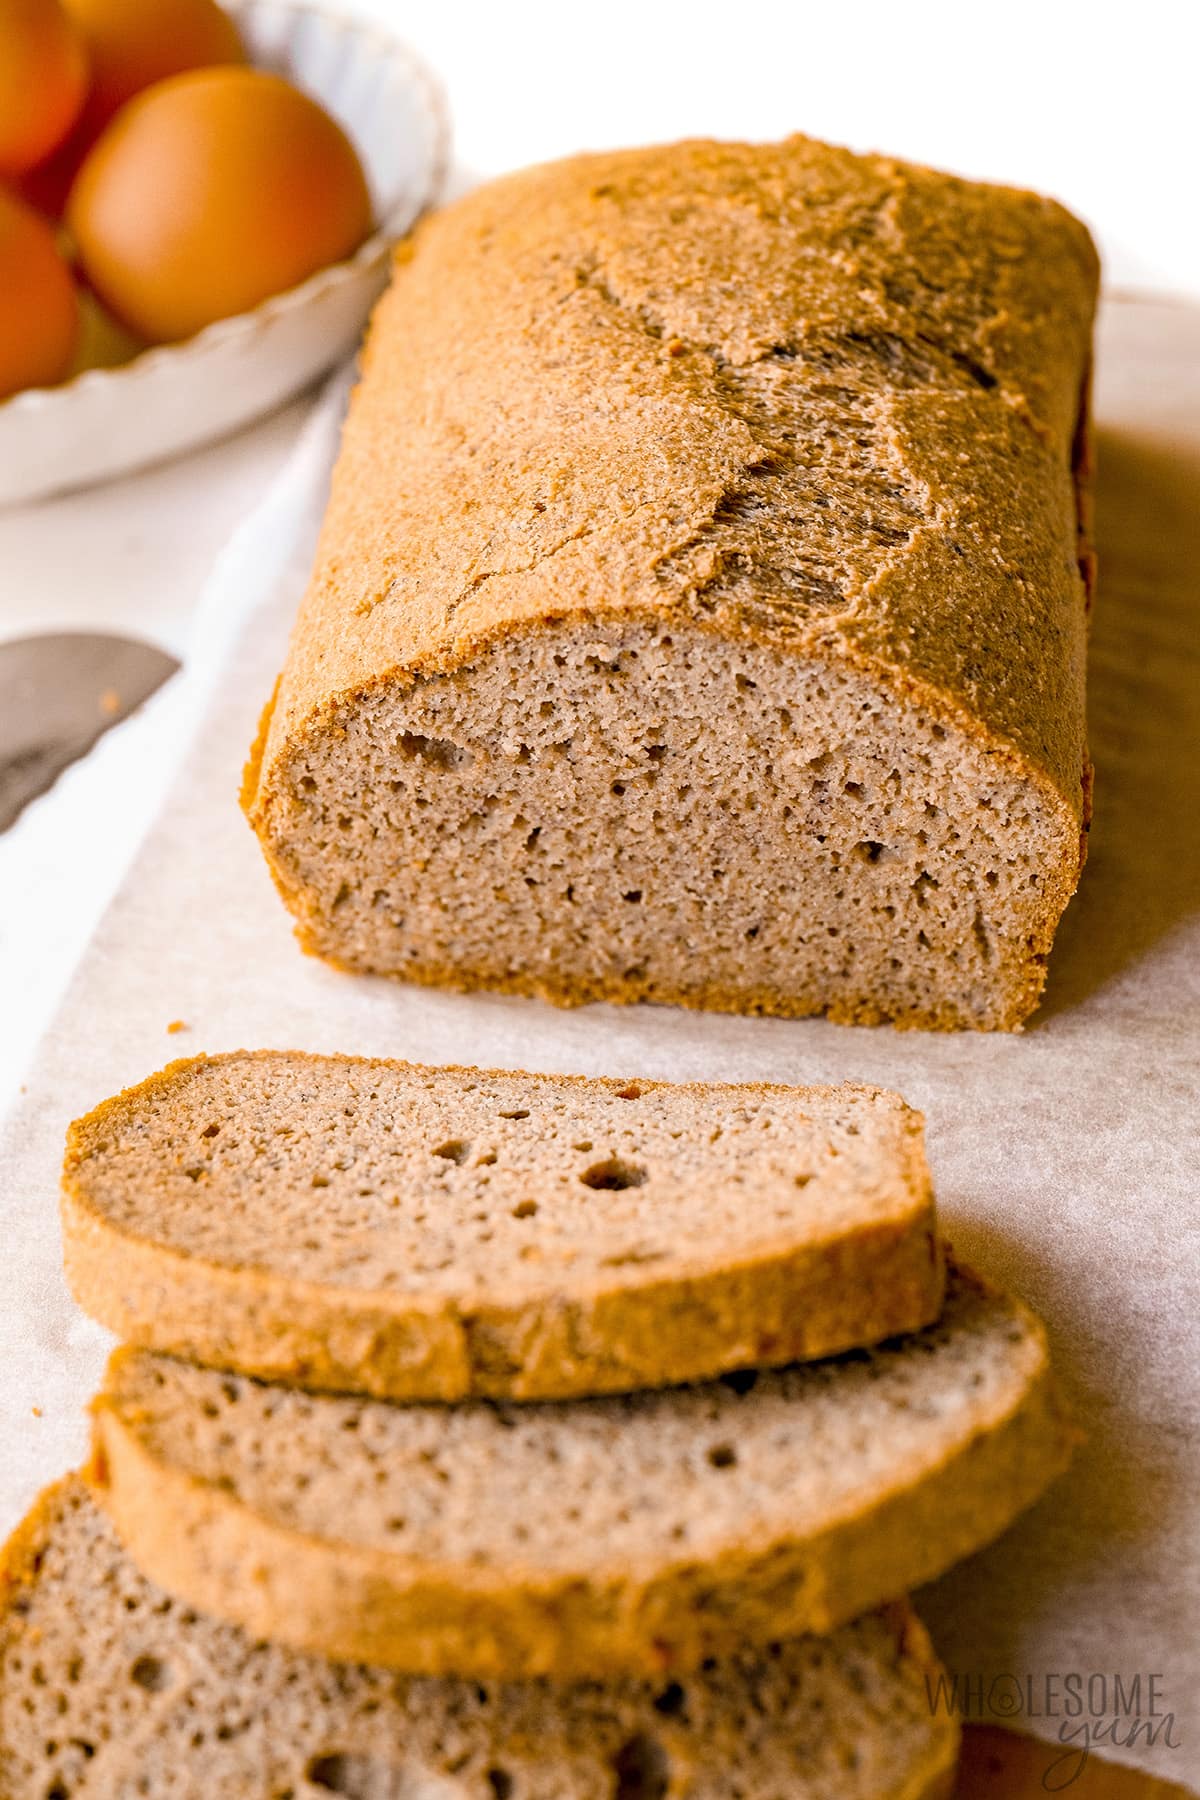 Slices of almond flour bread coming off a whole loaf.